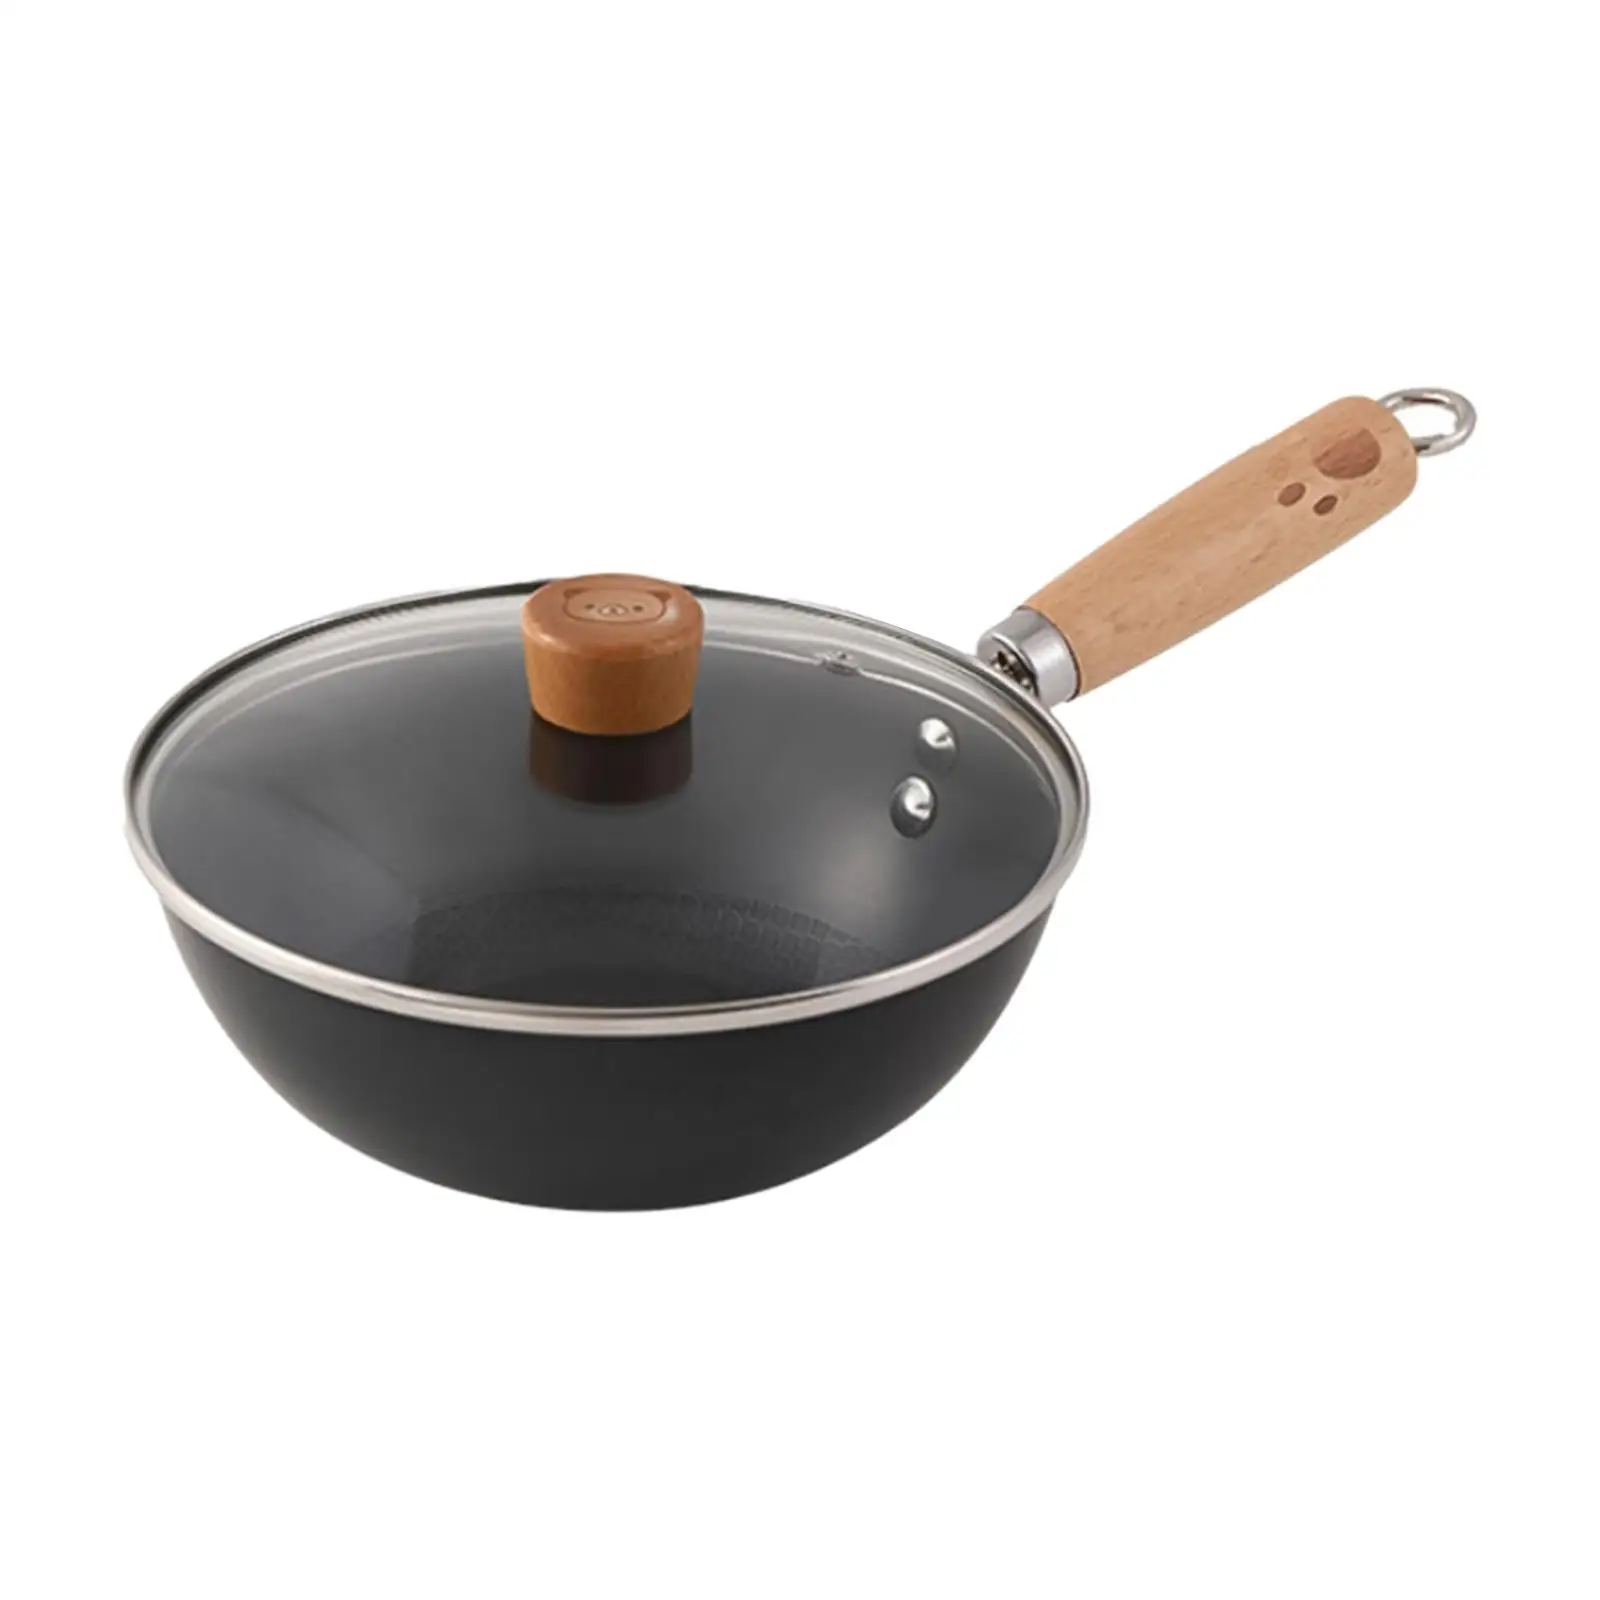 Nonstick Wok Universal Induction Cooker Wood Handle Cookware Uncoated Cooking Wok Pan Flat Bottom Wok Sturdy Stir Fry Pan